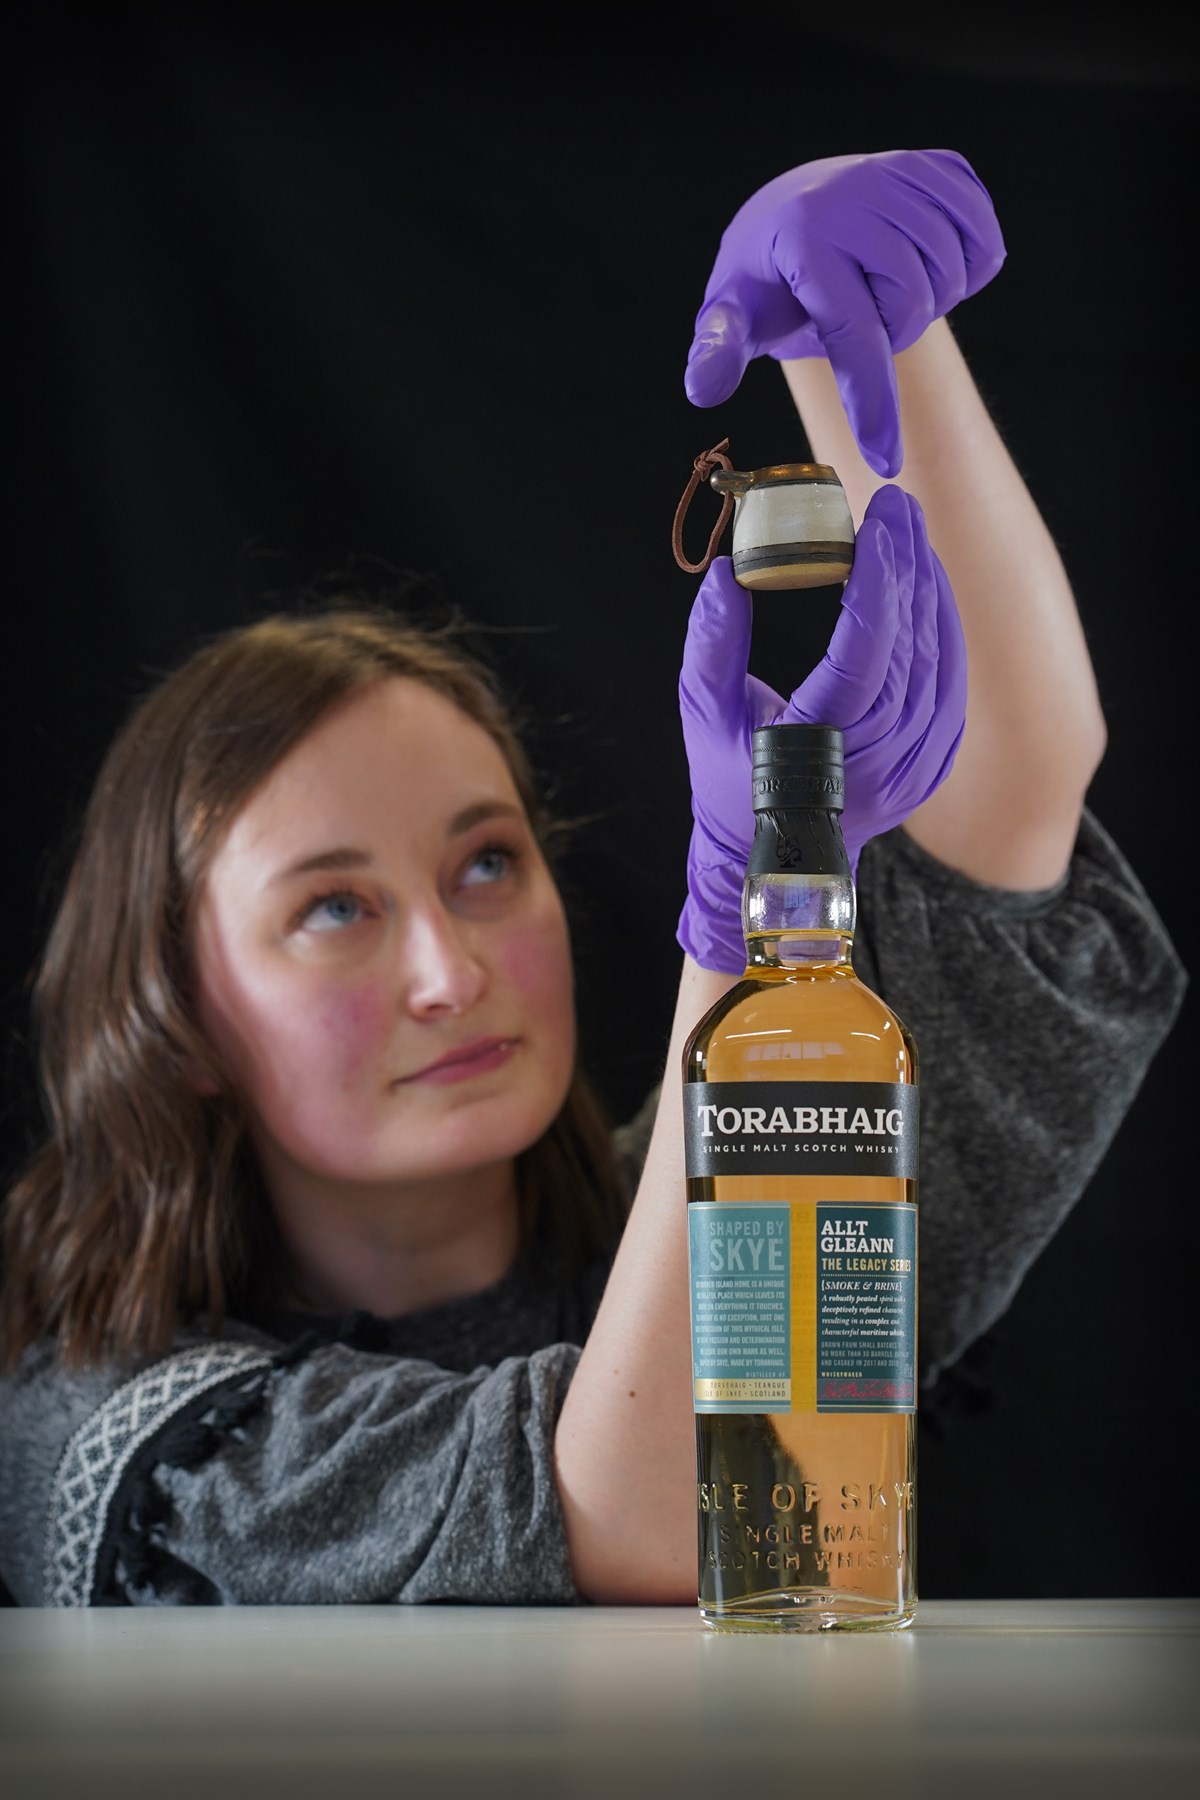 Doctoral Researcher Laura Scobie, with a ceramic measure created by Katharina Lenz and bottle from Torabhaig Distillery. Photo © Stewart Attwood.